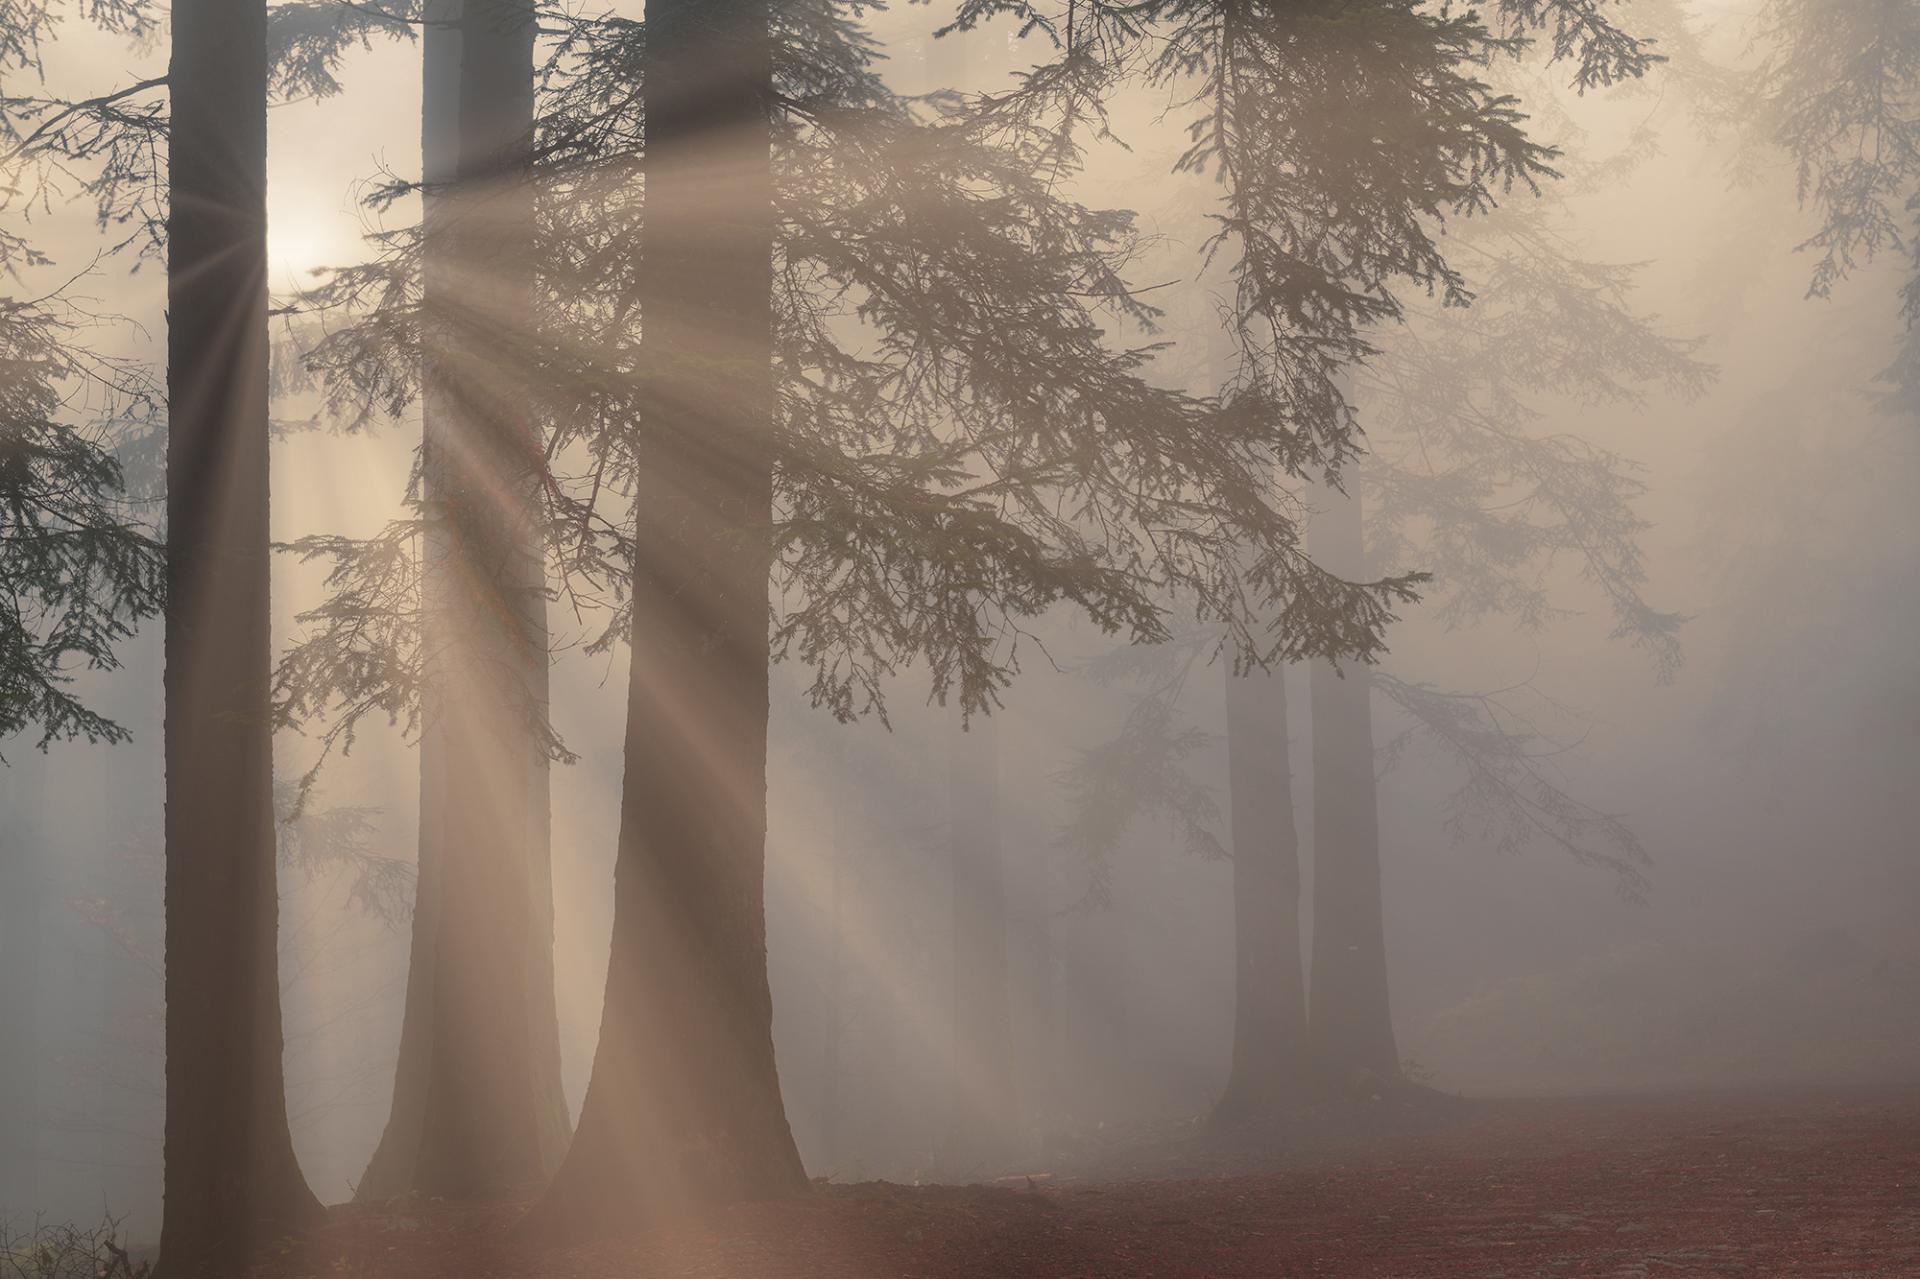 New York Photography Awards Winner - The Forest